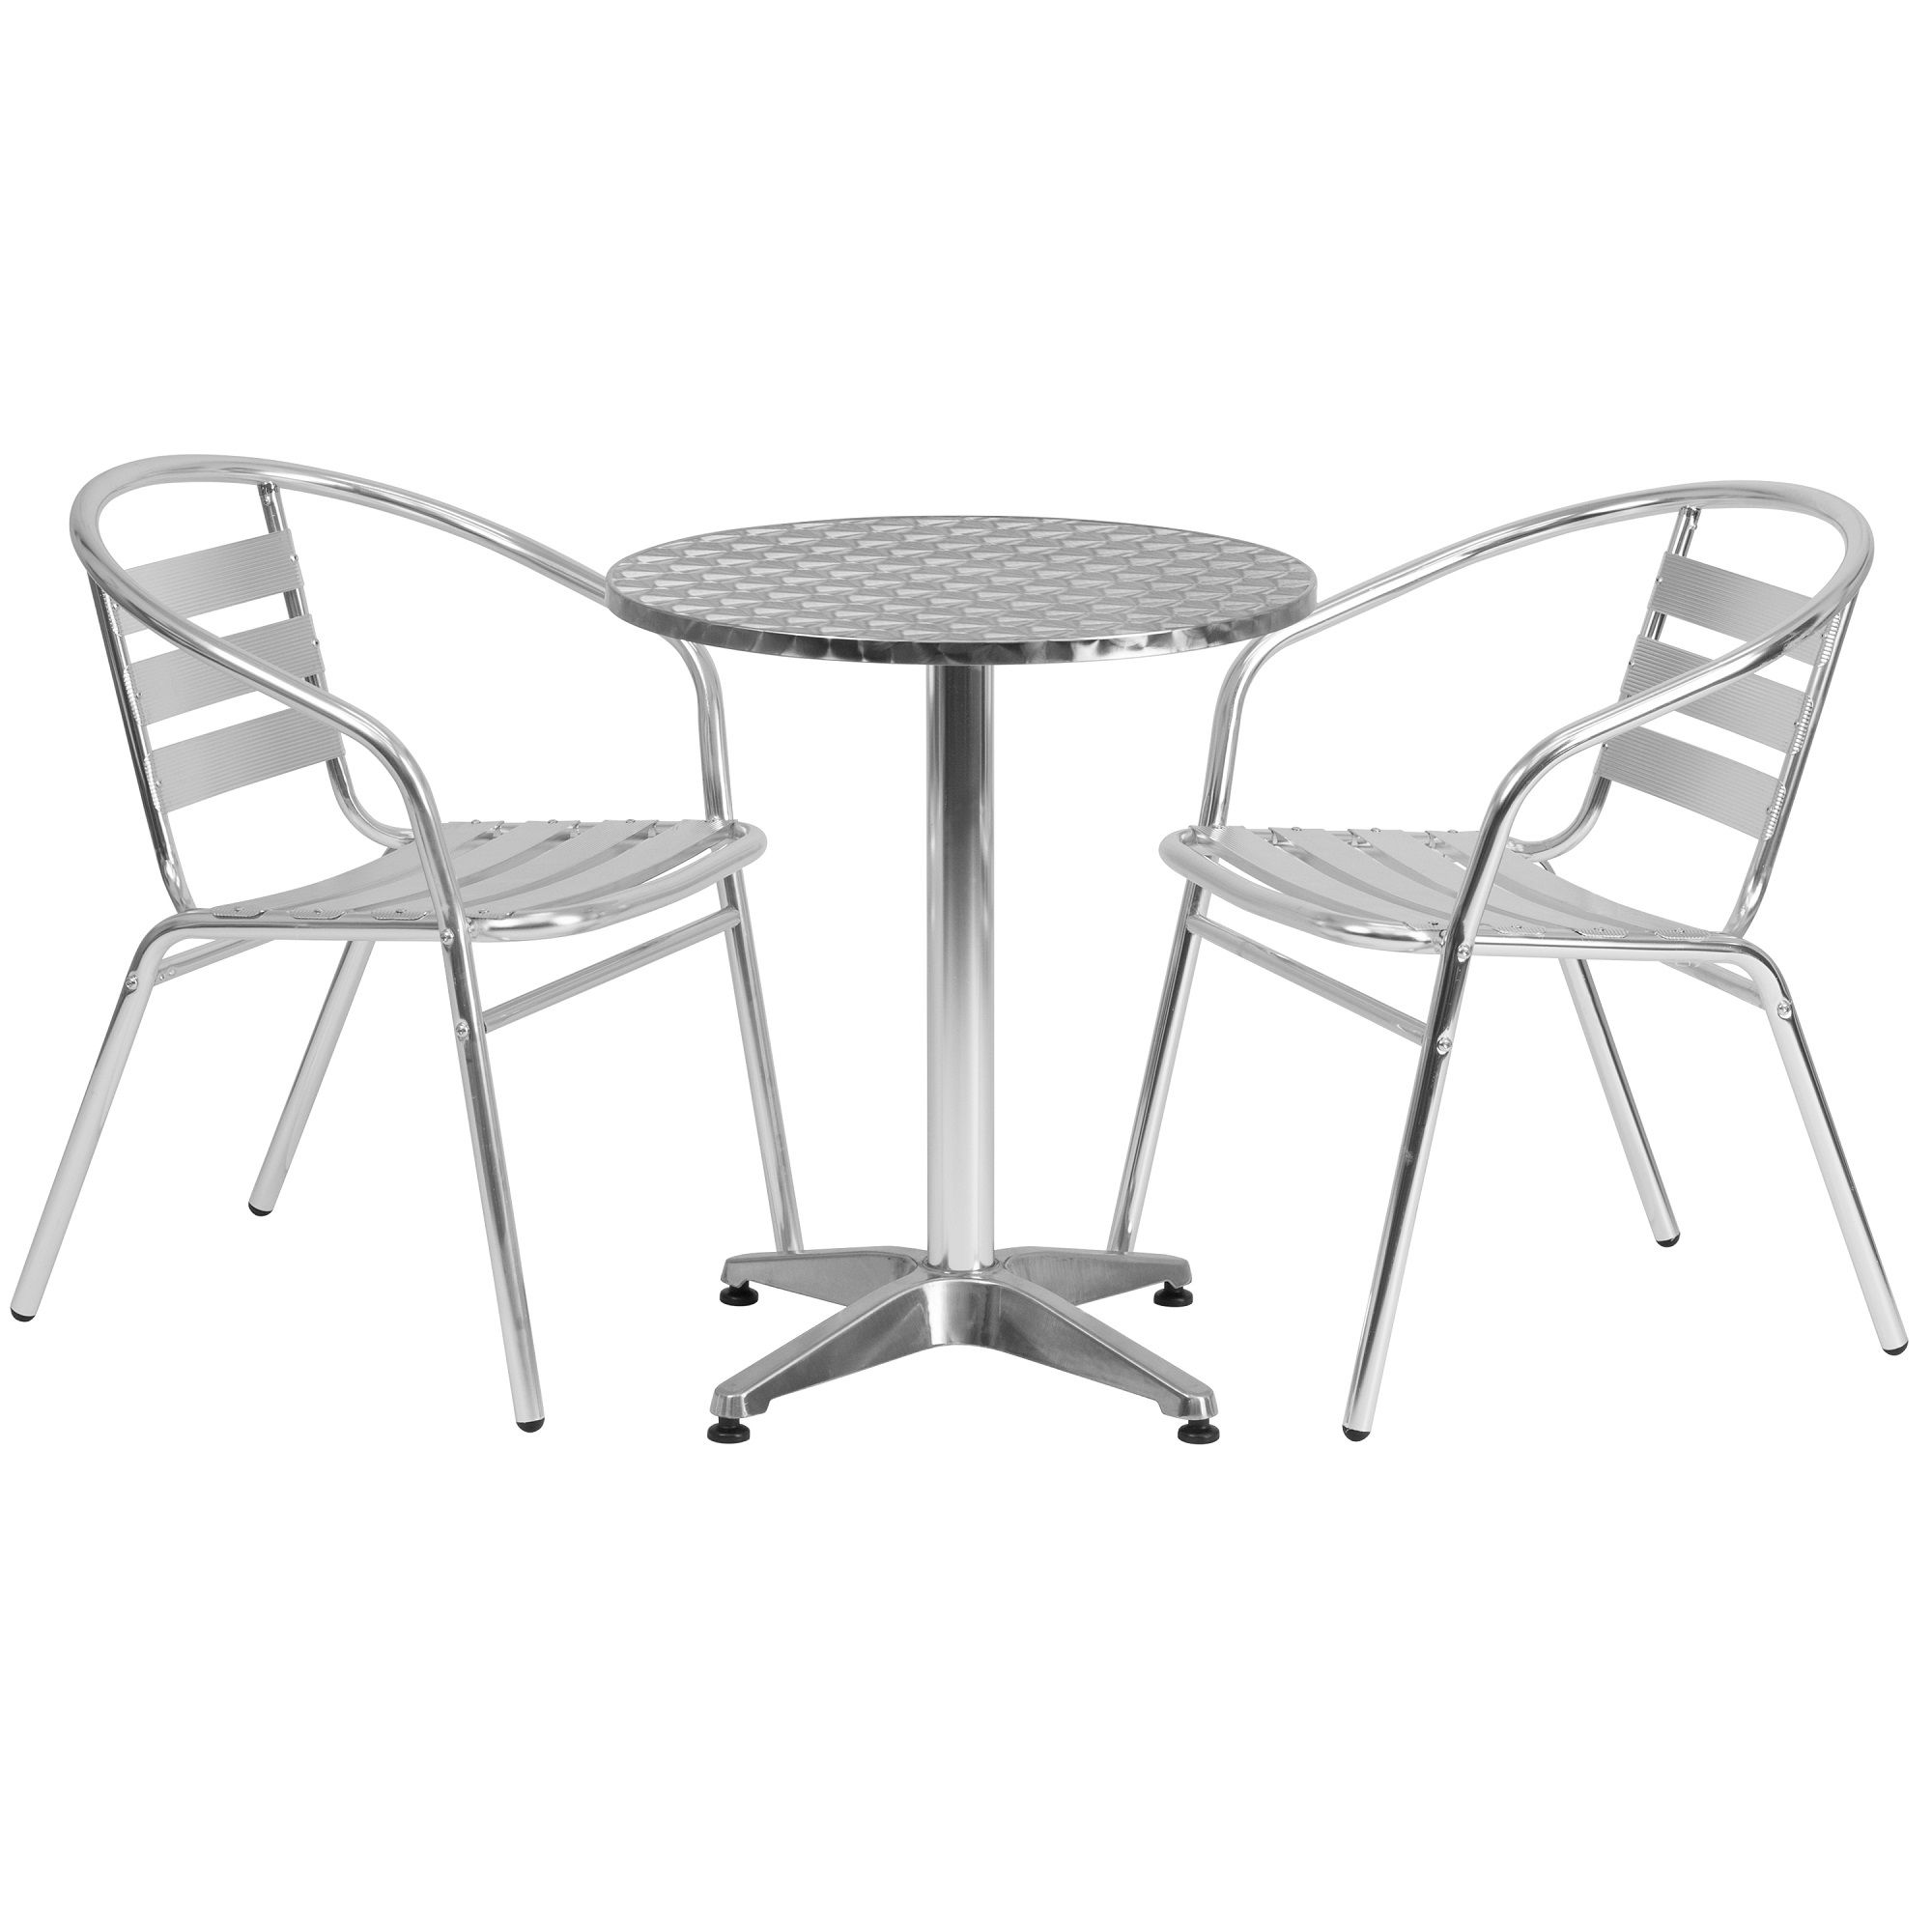 3 Piece Silver Round Slat Back Outdoor Furniture Patio Table And Stack Inside 3 Piece Outdoor Table And Chair Sets (View 15 of 15)